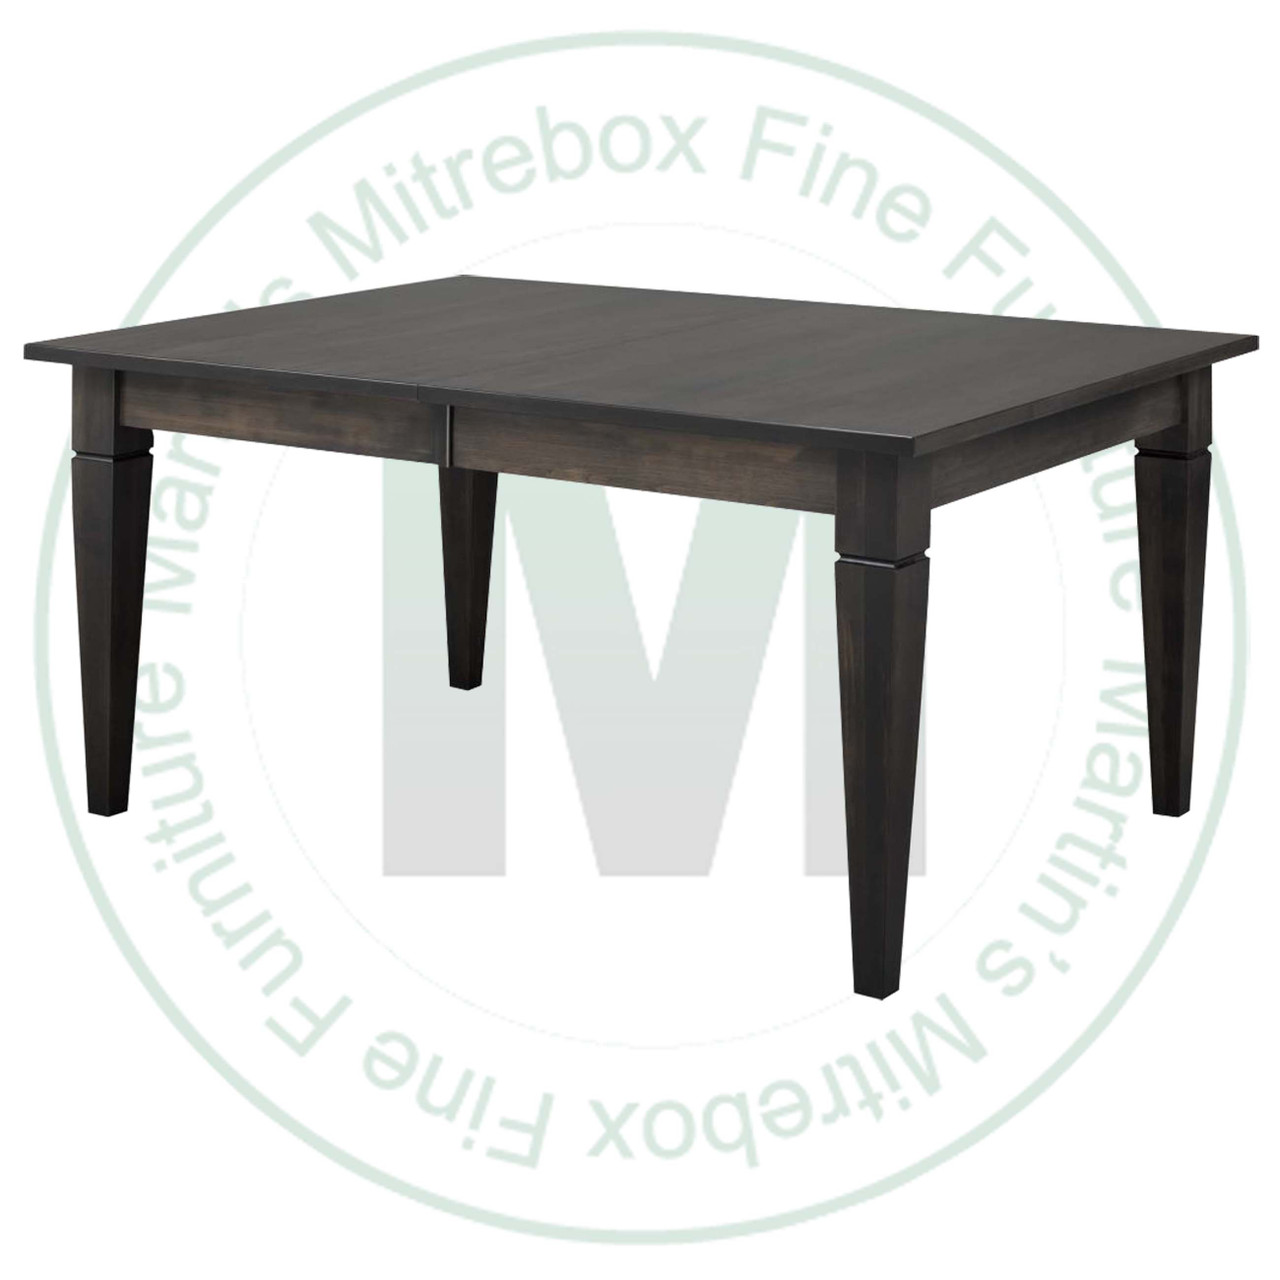 Maple Reesor Solid Top Harvest Table 48''D x 108''W x 30''H Table Has 1 3/4'' Thick Top And 2 - 16'' Extensions